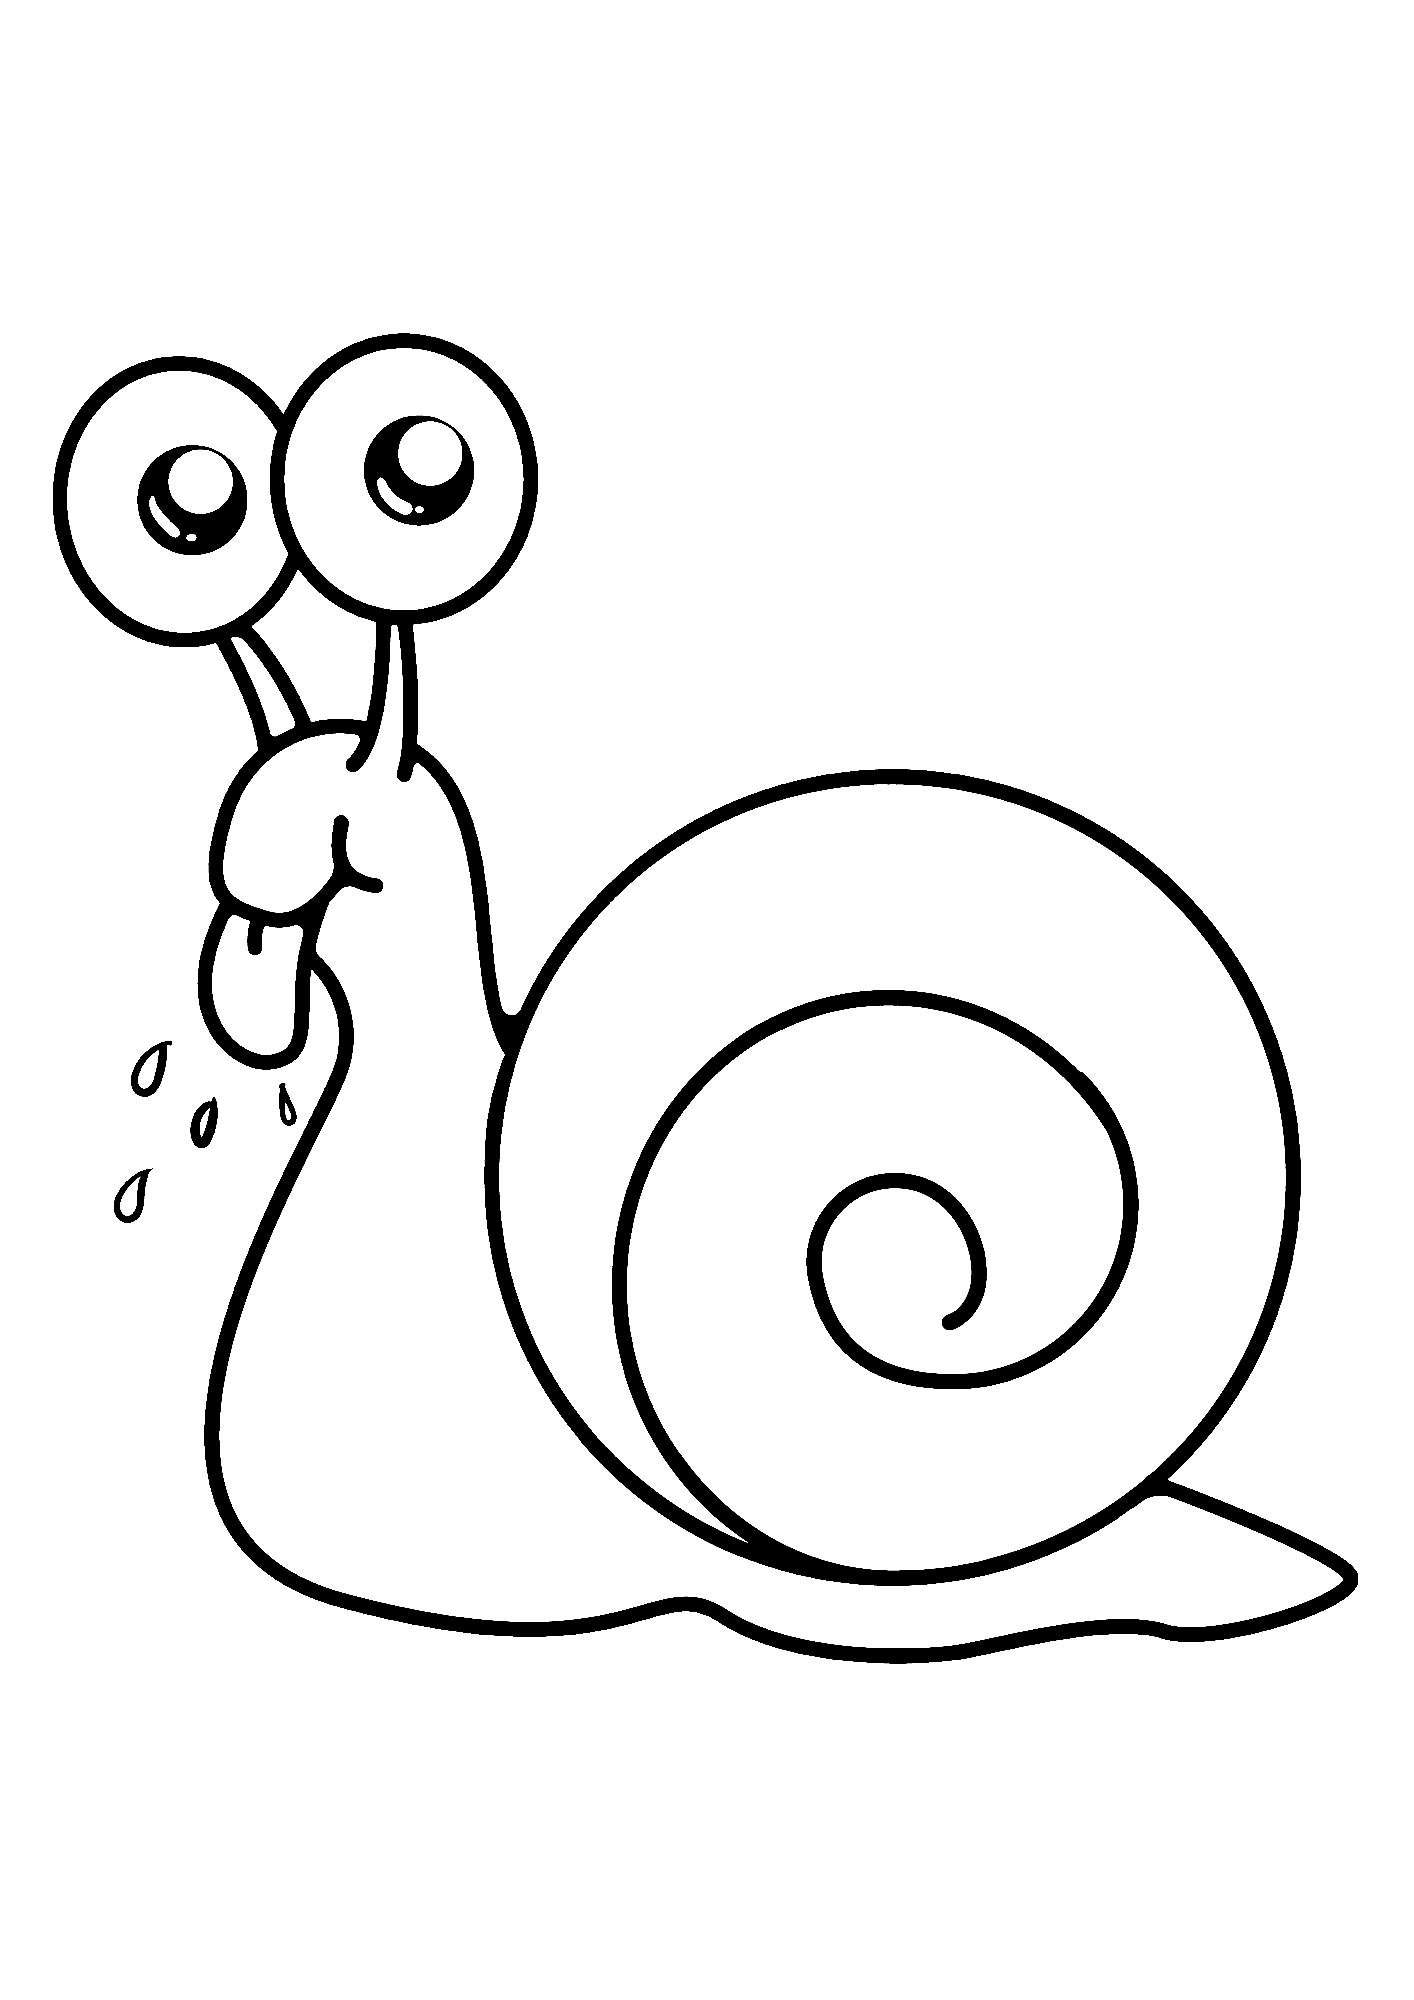 Snail Drrawing image Coloring Pages